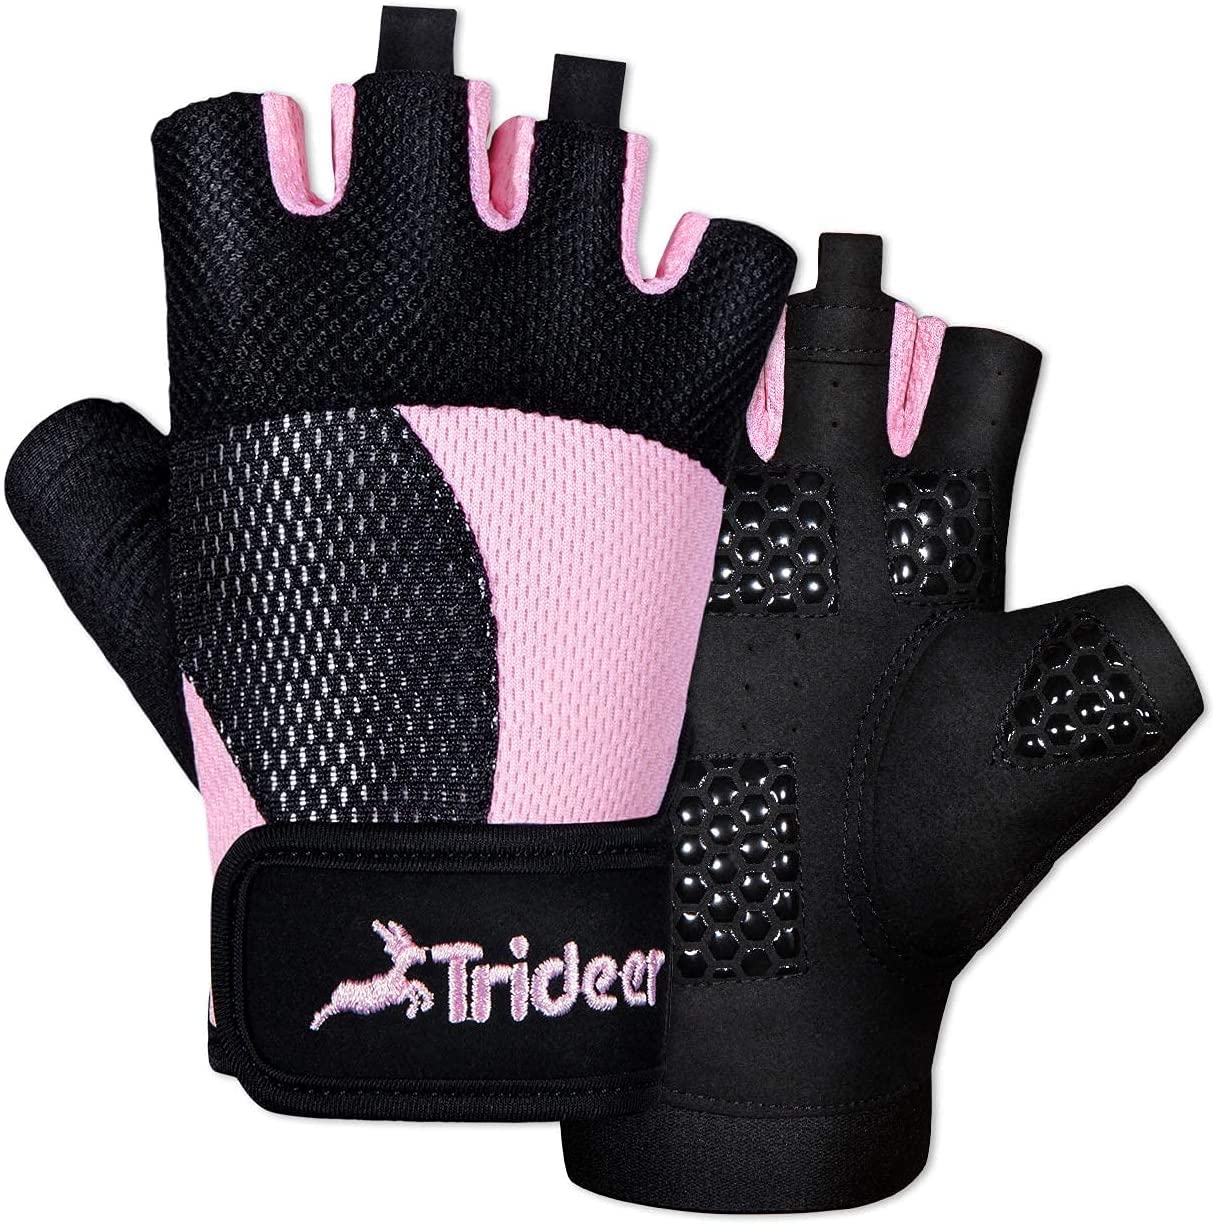 Trideer Breathable Workout Gloves Women with Grip, Weight Lifting Gloves  Gym Gloves for Weightlifting, Exercise, Training, Rowing and Biking Pink  Small (6.3-7.1 in)